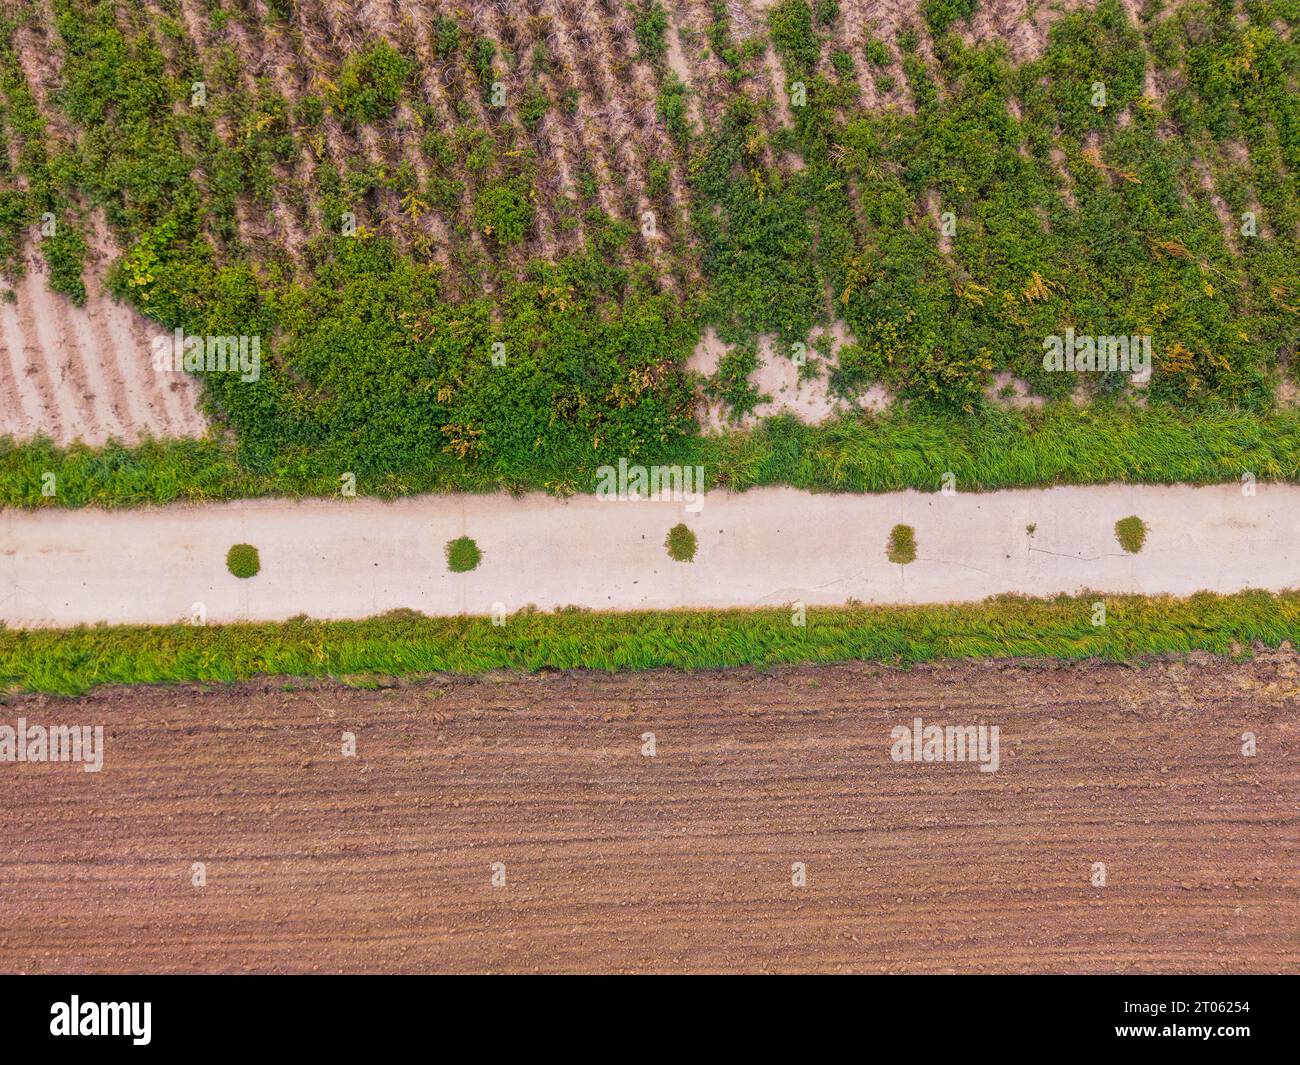 A farm road in rural area next to fields with soil and green plants Stock Photo